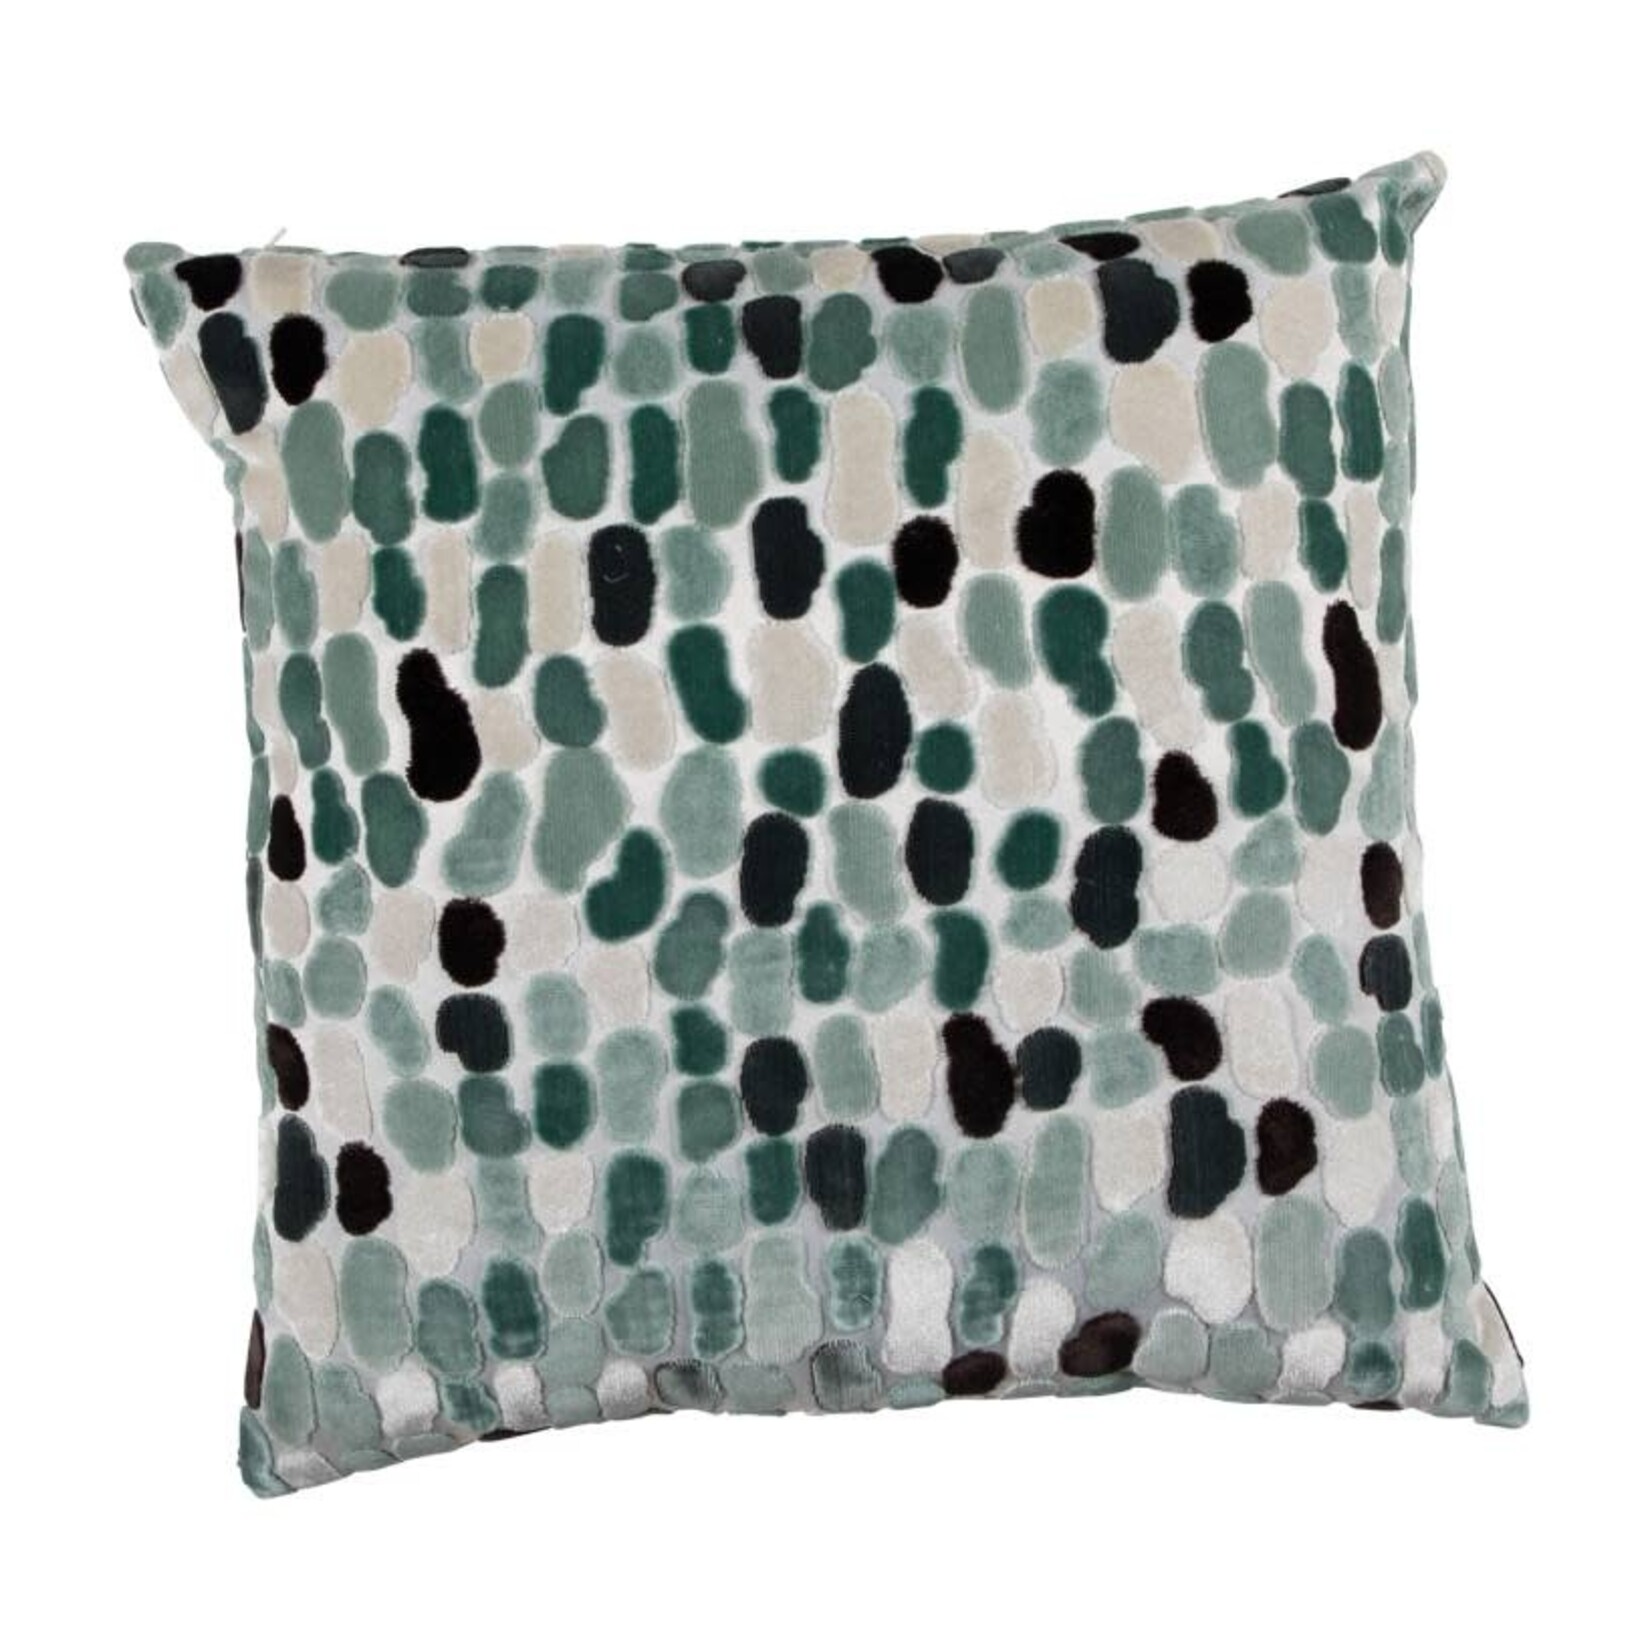 Outside The Box 22x22 Wendy Jane River Rock Moss Performance Fabric Feather Down Accent Pillow